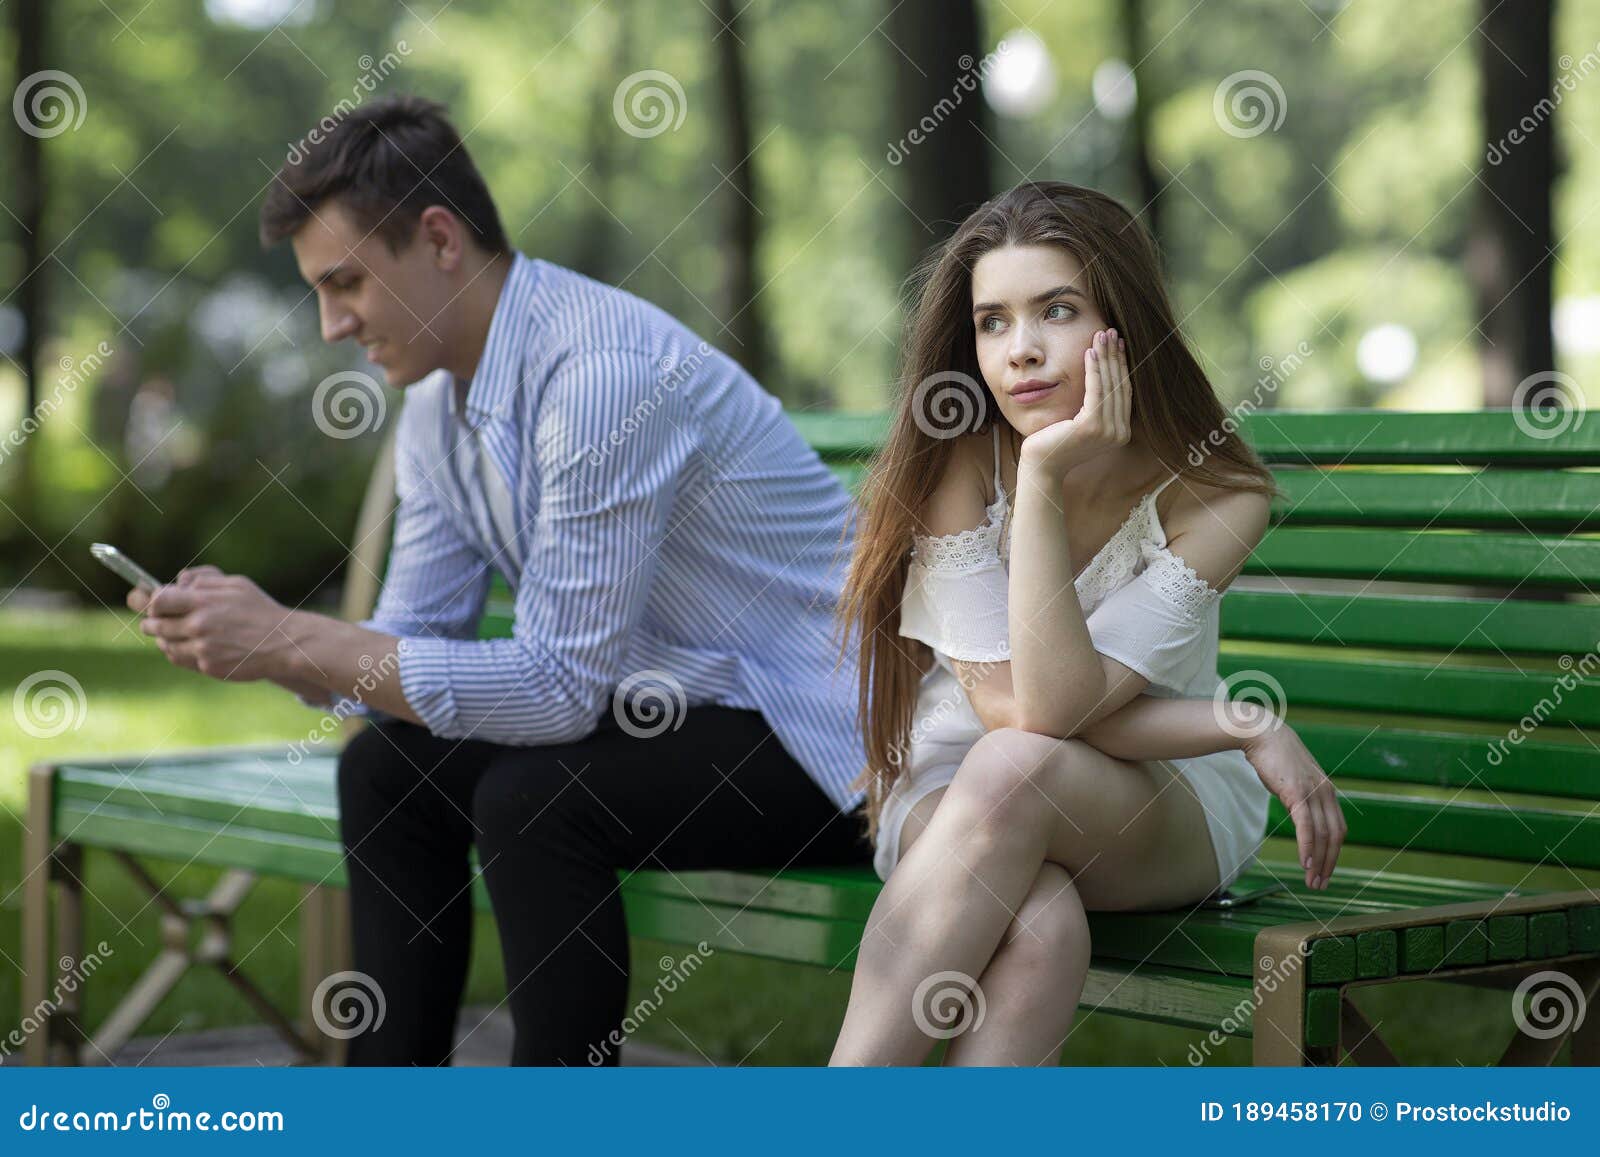 gadget addiction. bored young girl and her boyfriend stuck in cellphone on dull date at park